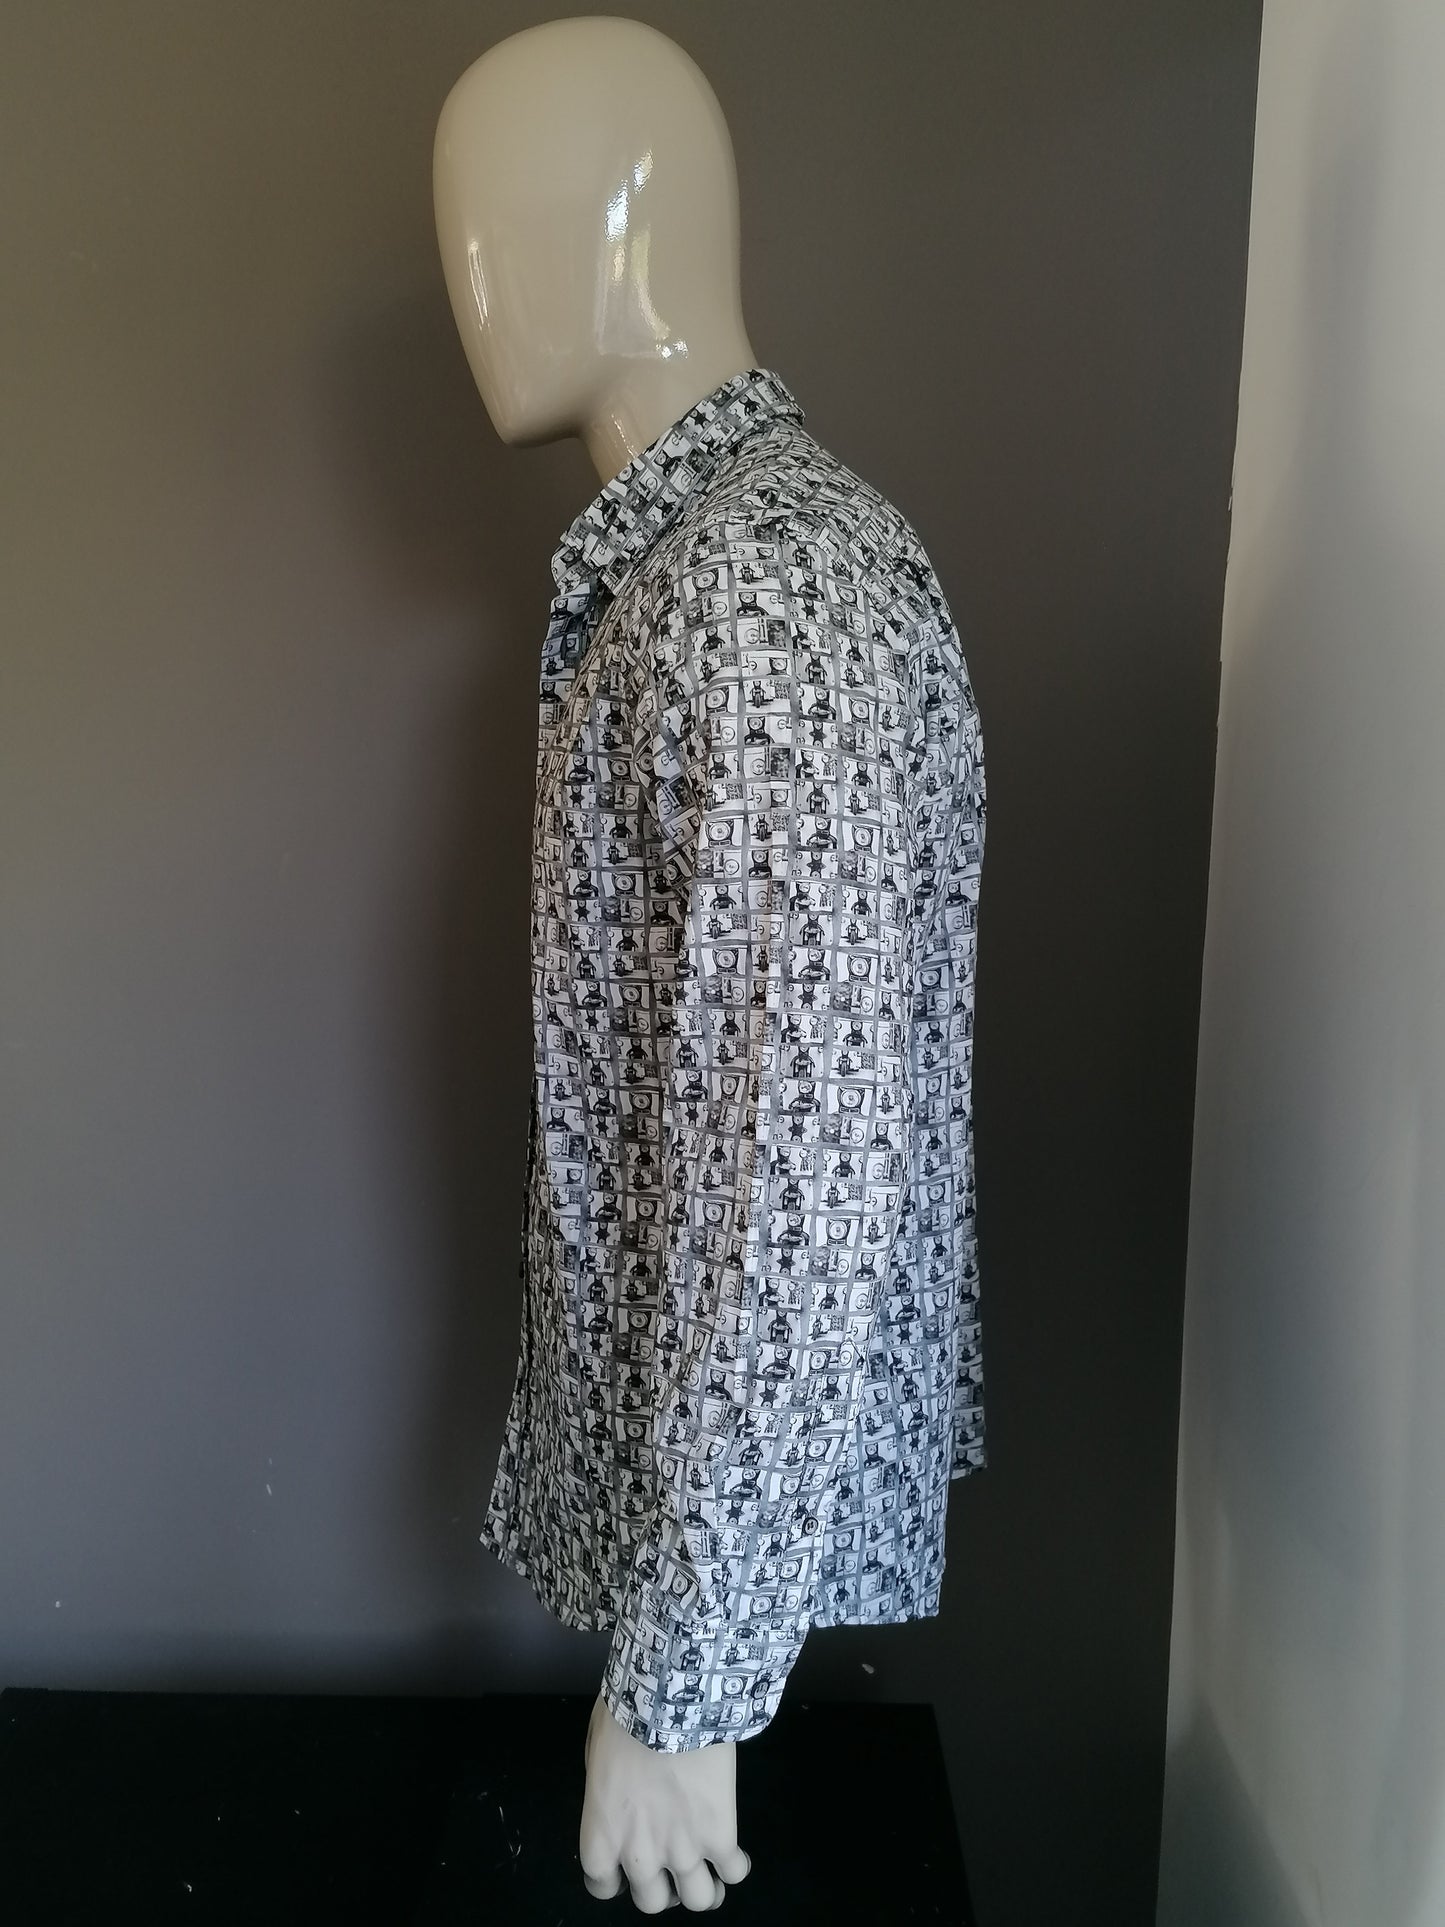 Haupted shirt. Gray white motor print. Size L. Modern Fit.